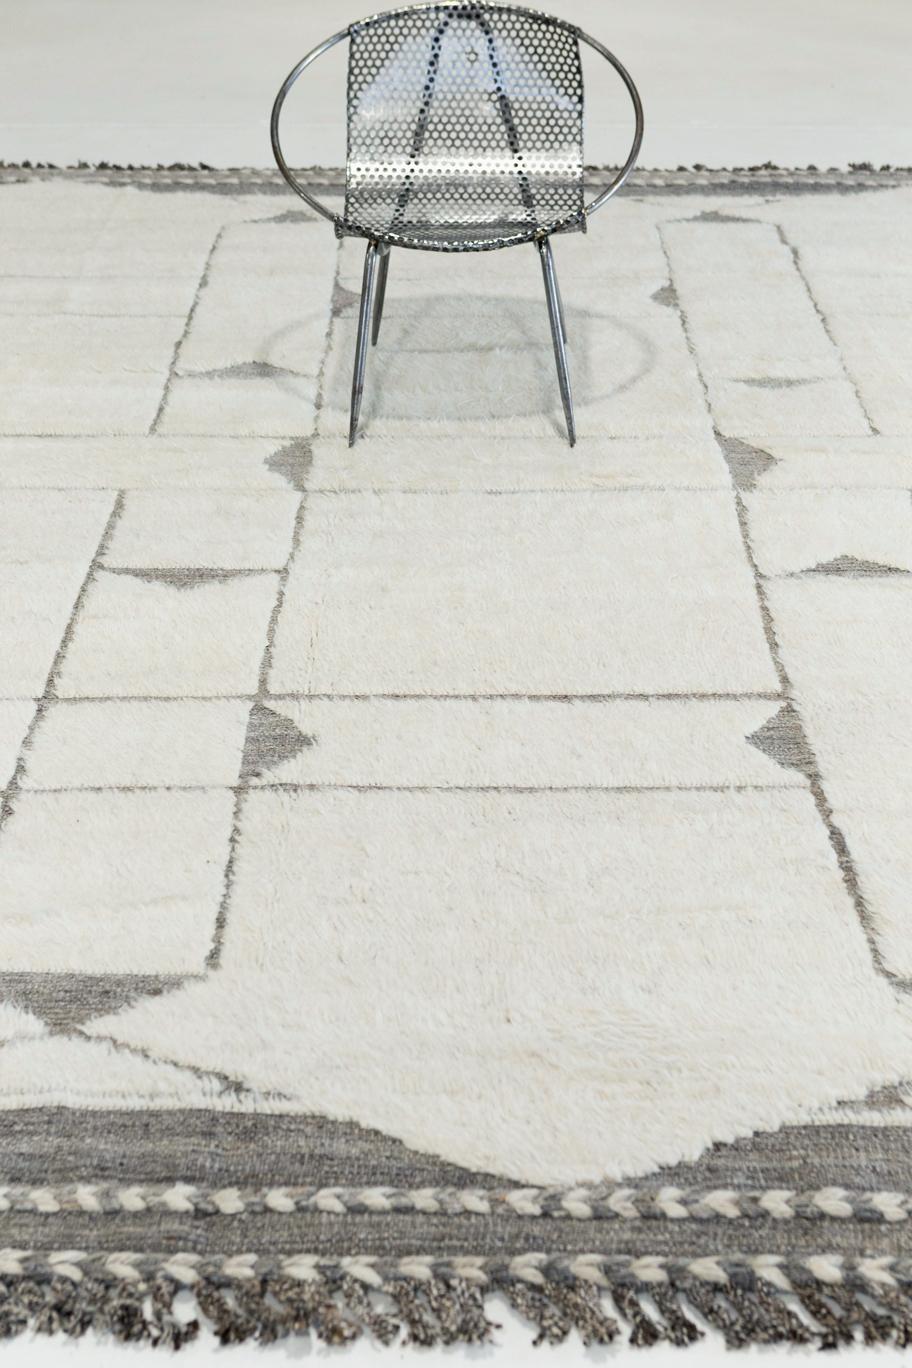 Essaouina is a beautifully textured rug with embossed designs inspired from the Atlas Mountains of Morocco. Natural gray motifs surrounded by ivory shag and tasseled borders make for a great contemporary interpretation for the modern design world.